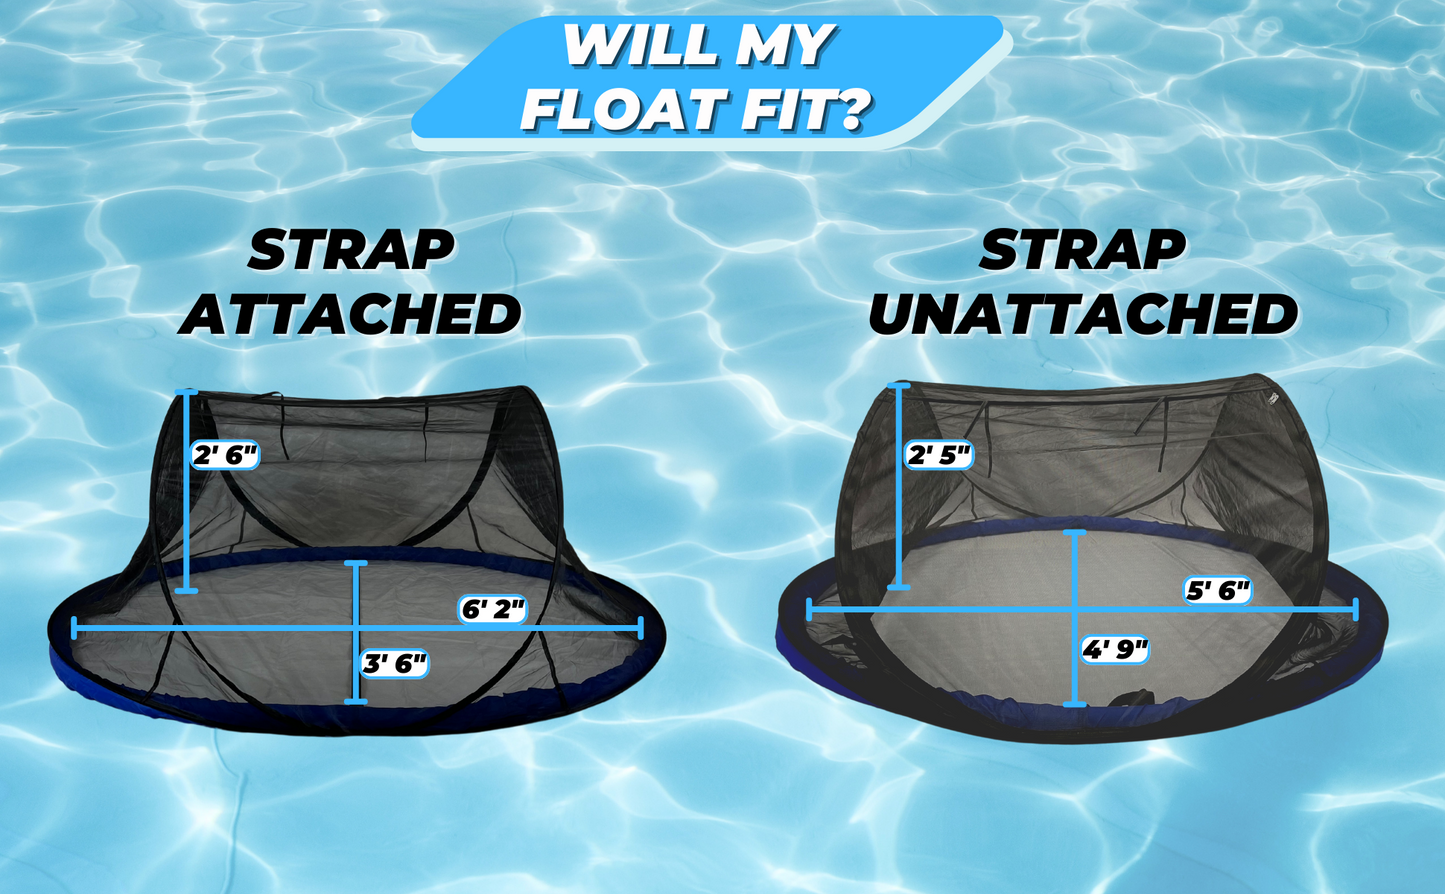 Size of Pest Awaysis with and without strap, check if pool float will fit under net. 